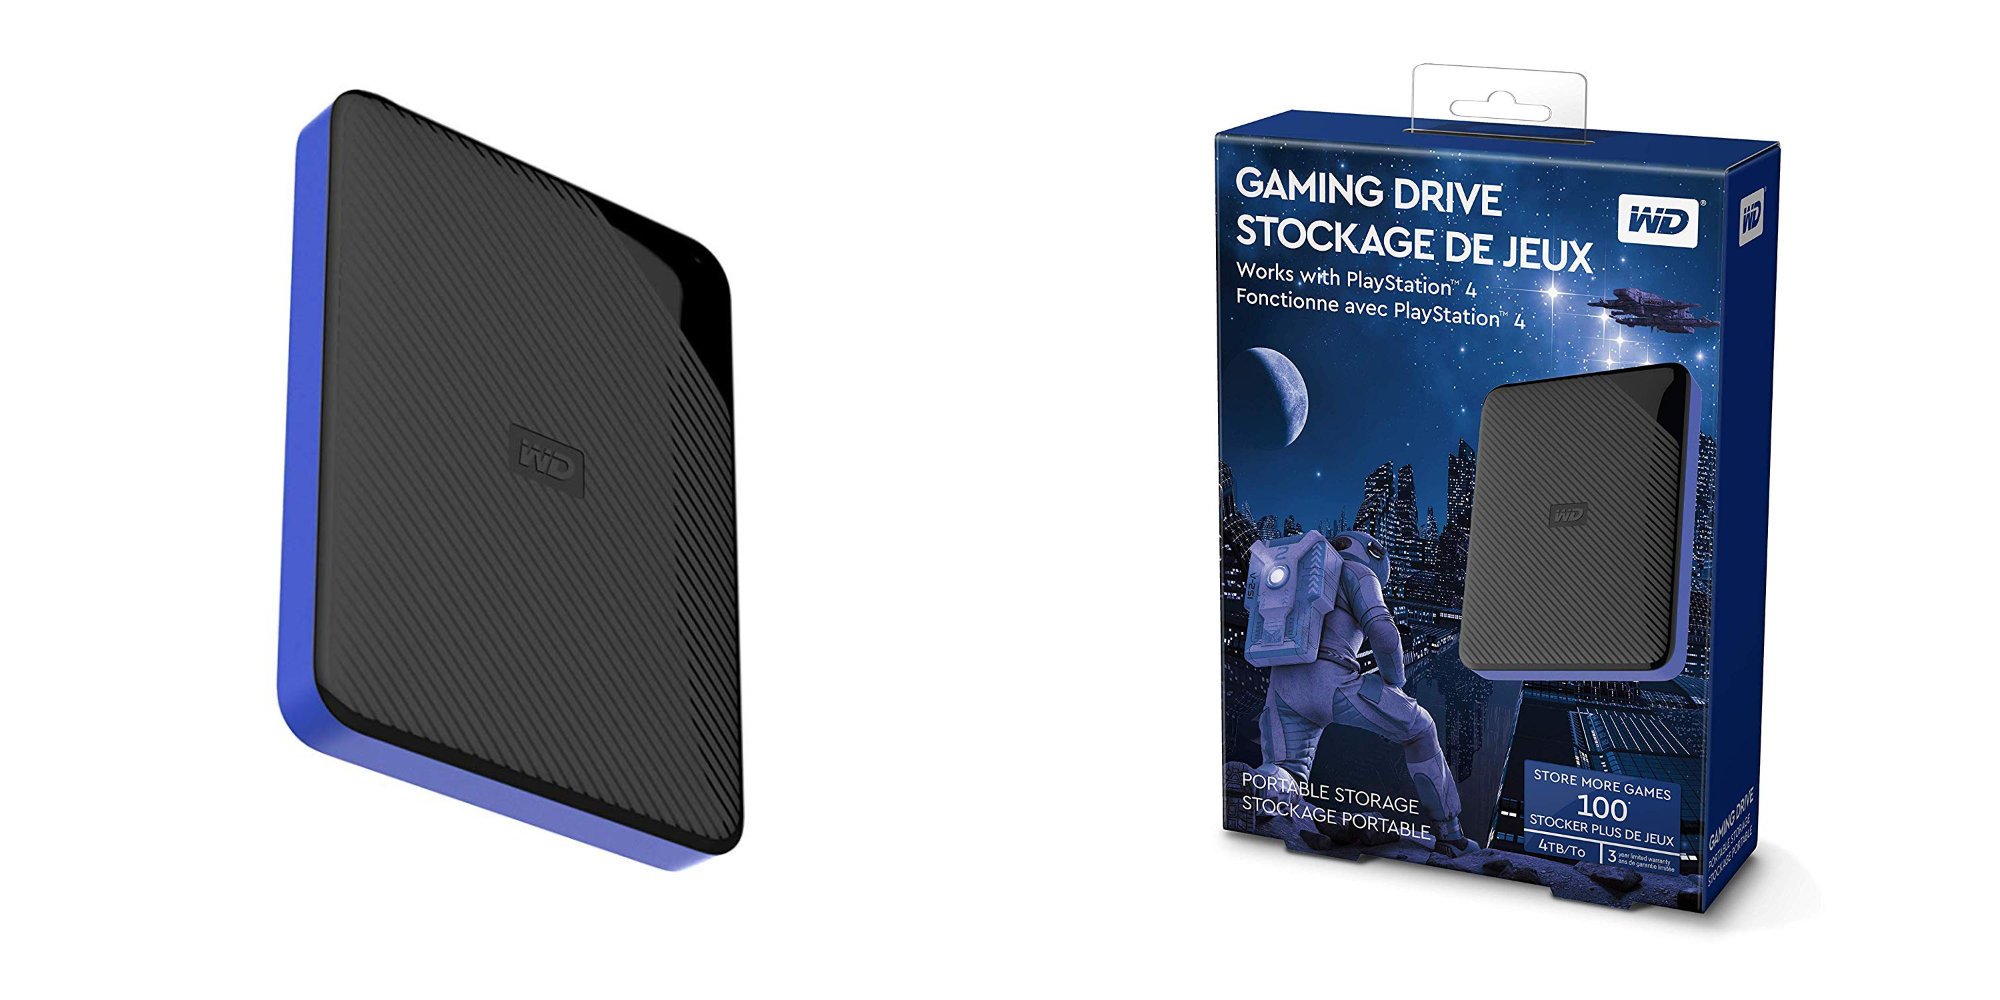 Wd game drive. WD Gaming Drive 4tb. WD games. WD game backpicture. Как сайднит игровой WD 184.